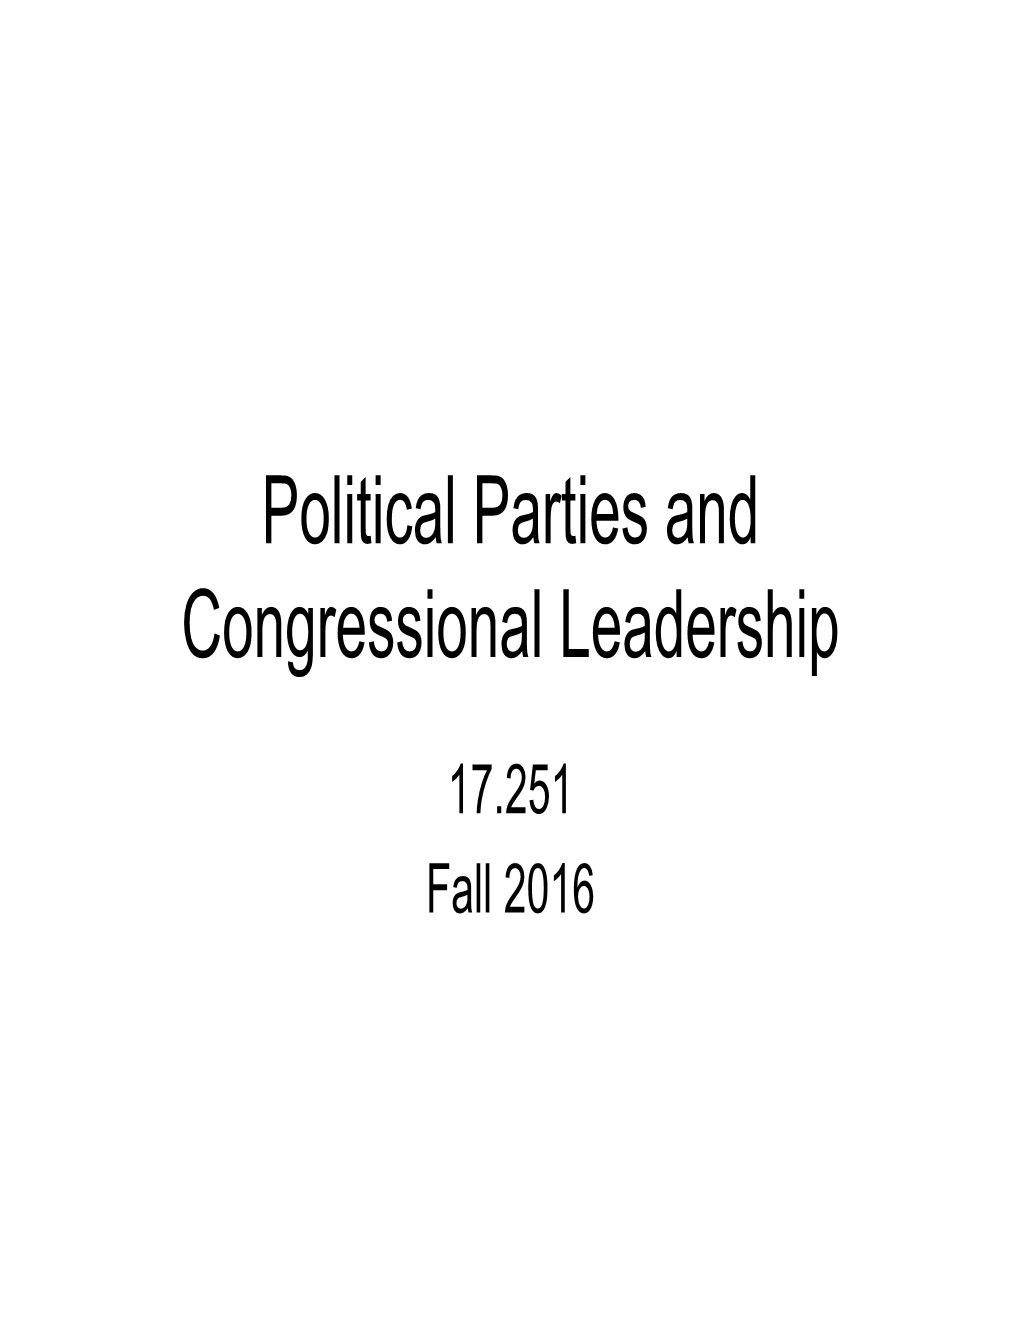 Political Parties and Congressional Leadership